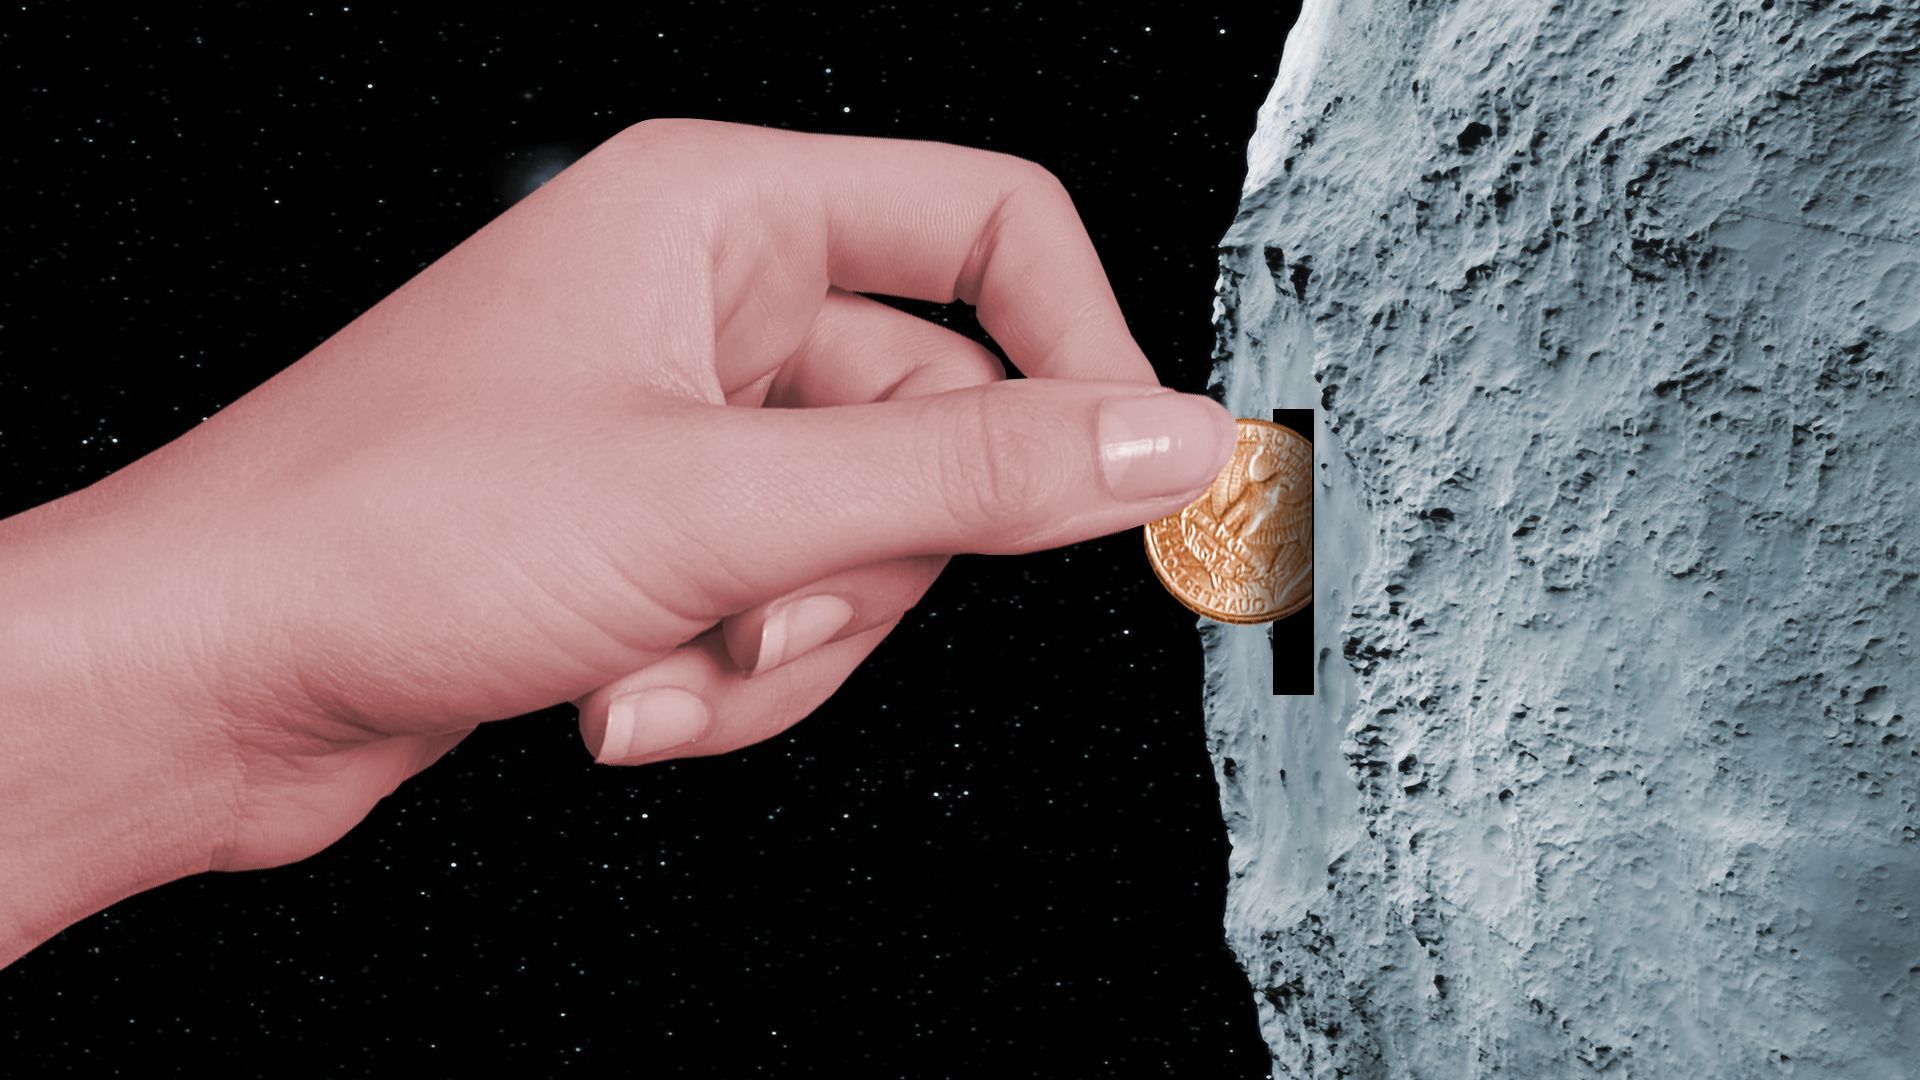 Illustration of a hand placing a quarter into the moon